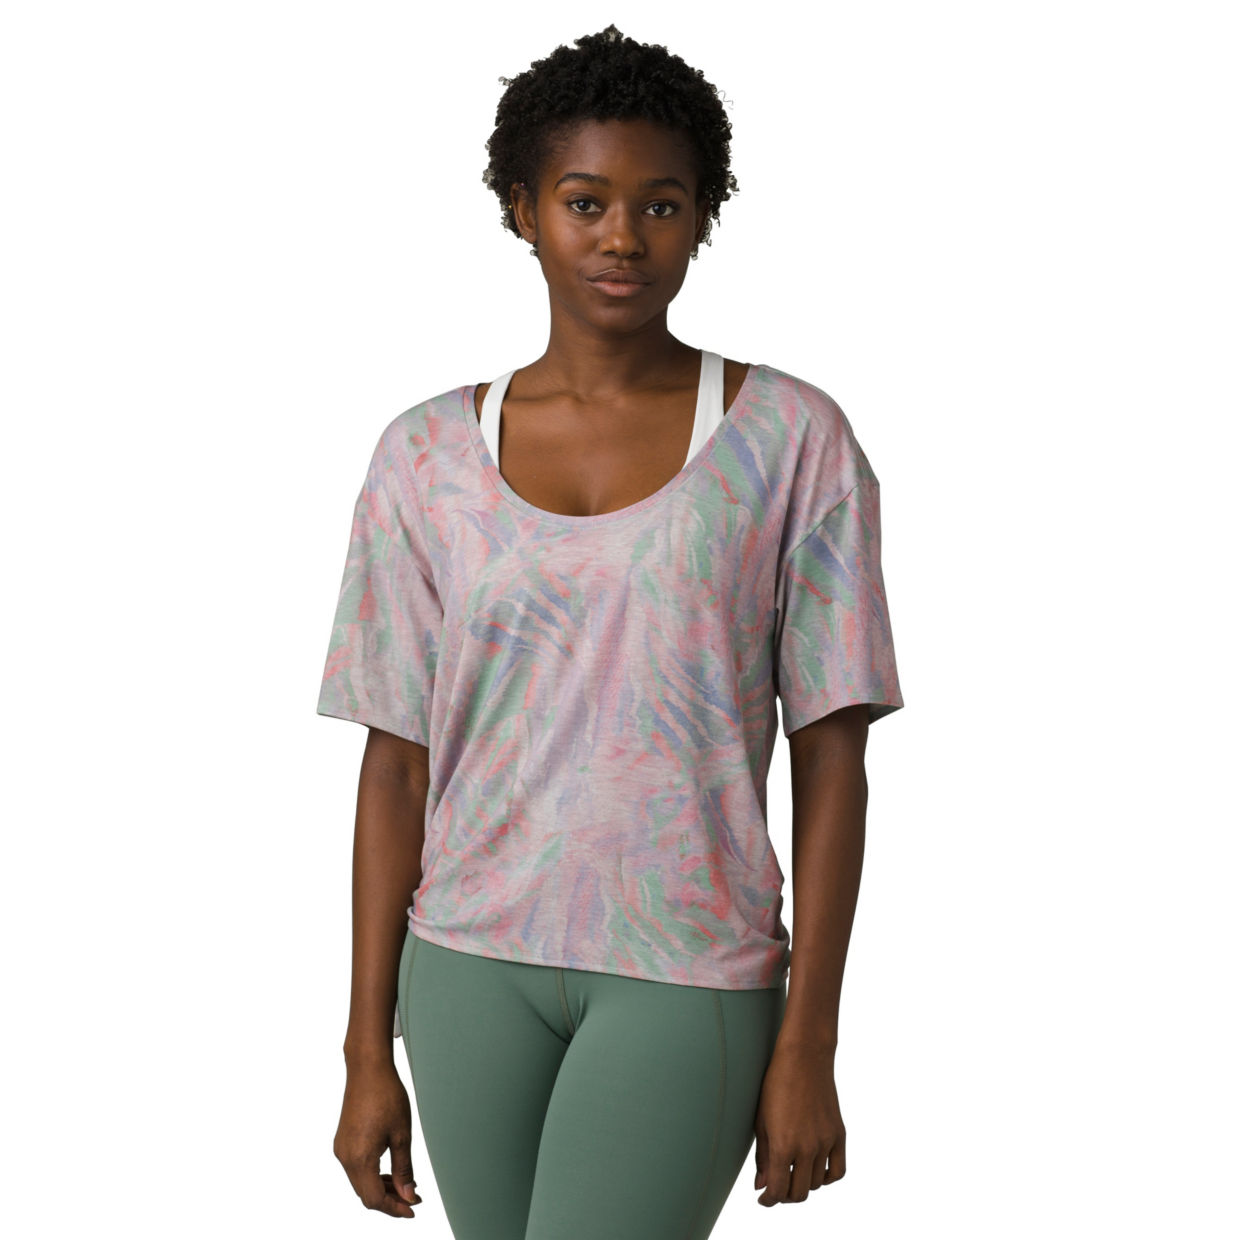 Women's prAna® Polyjungle Side-Tie Top Mint Size Medium Synthetic/Recycled Materials